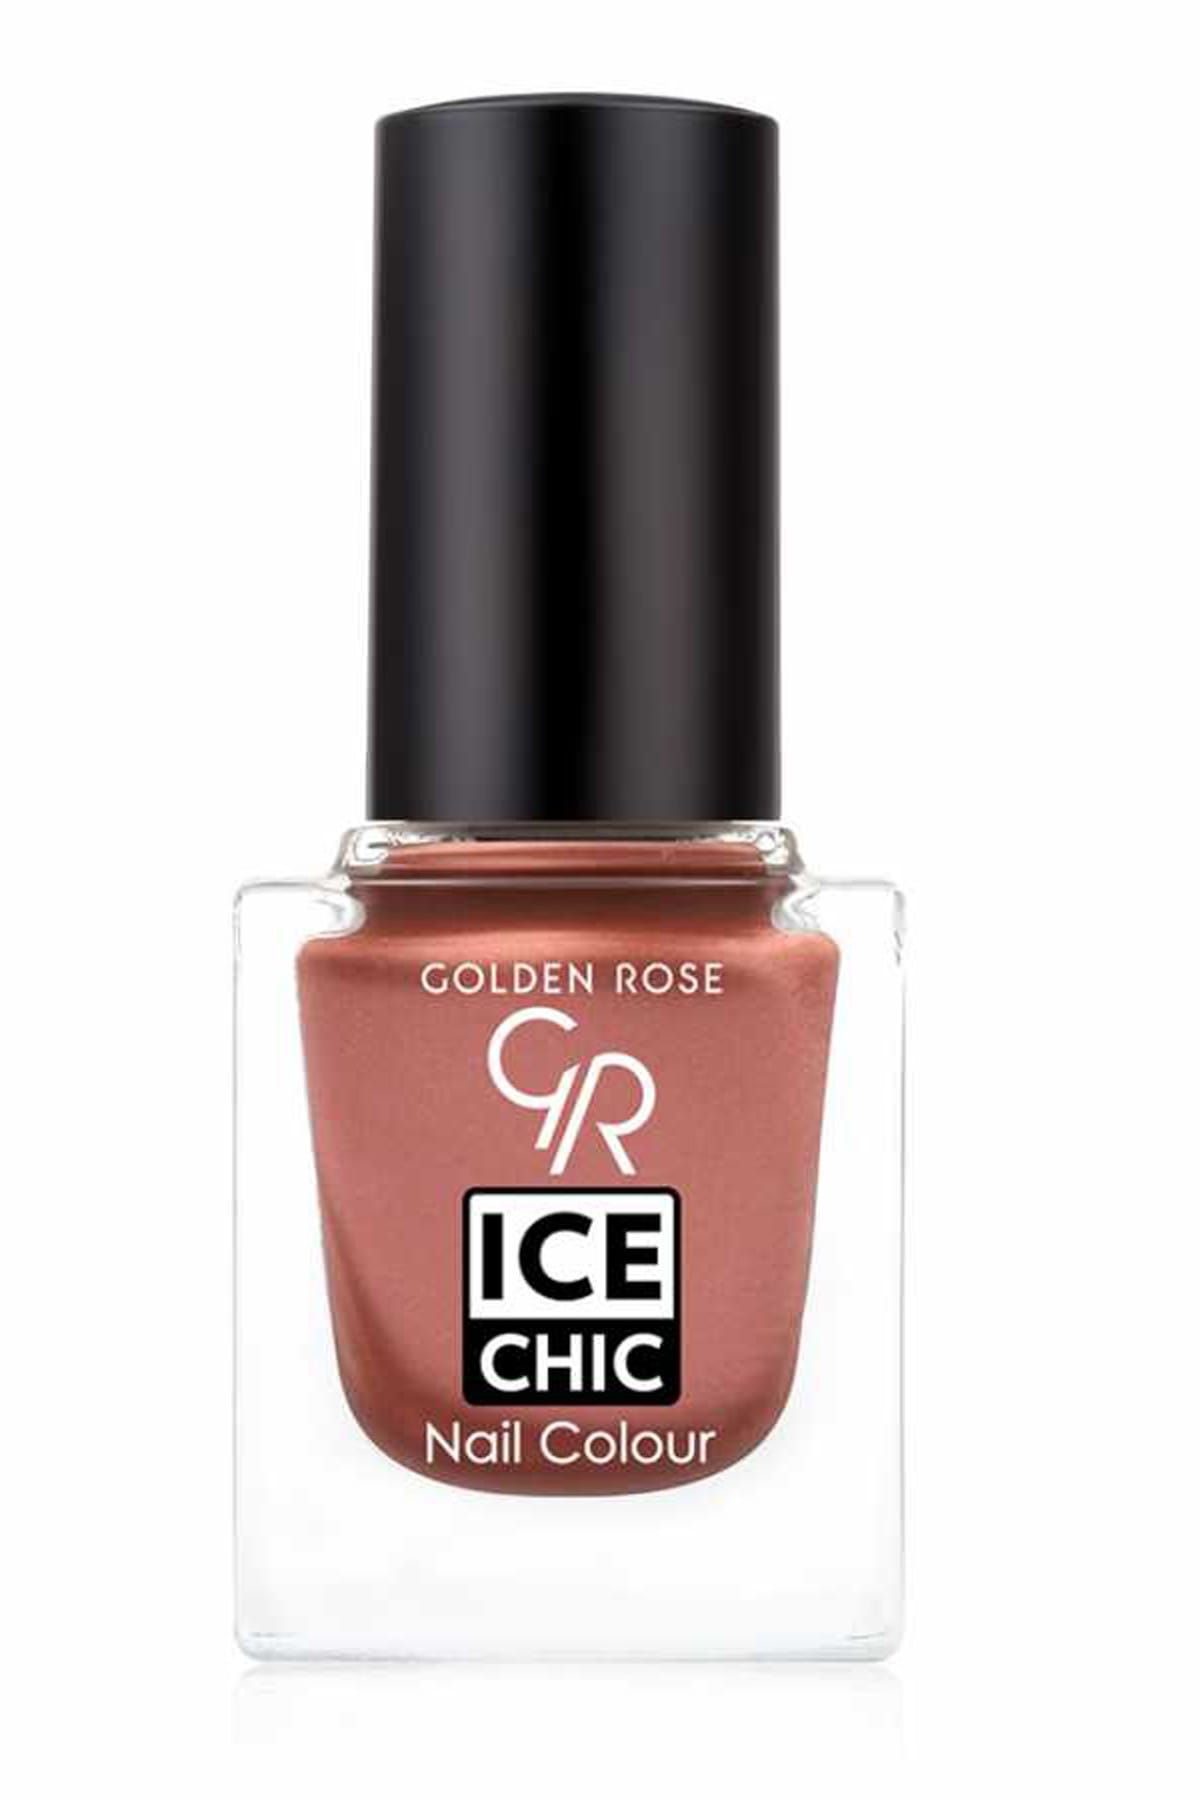 Golden Rose Oje - Ice Chic Nail Colour No: 62 8691190860622